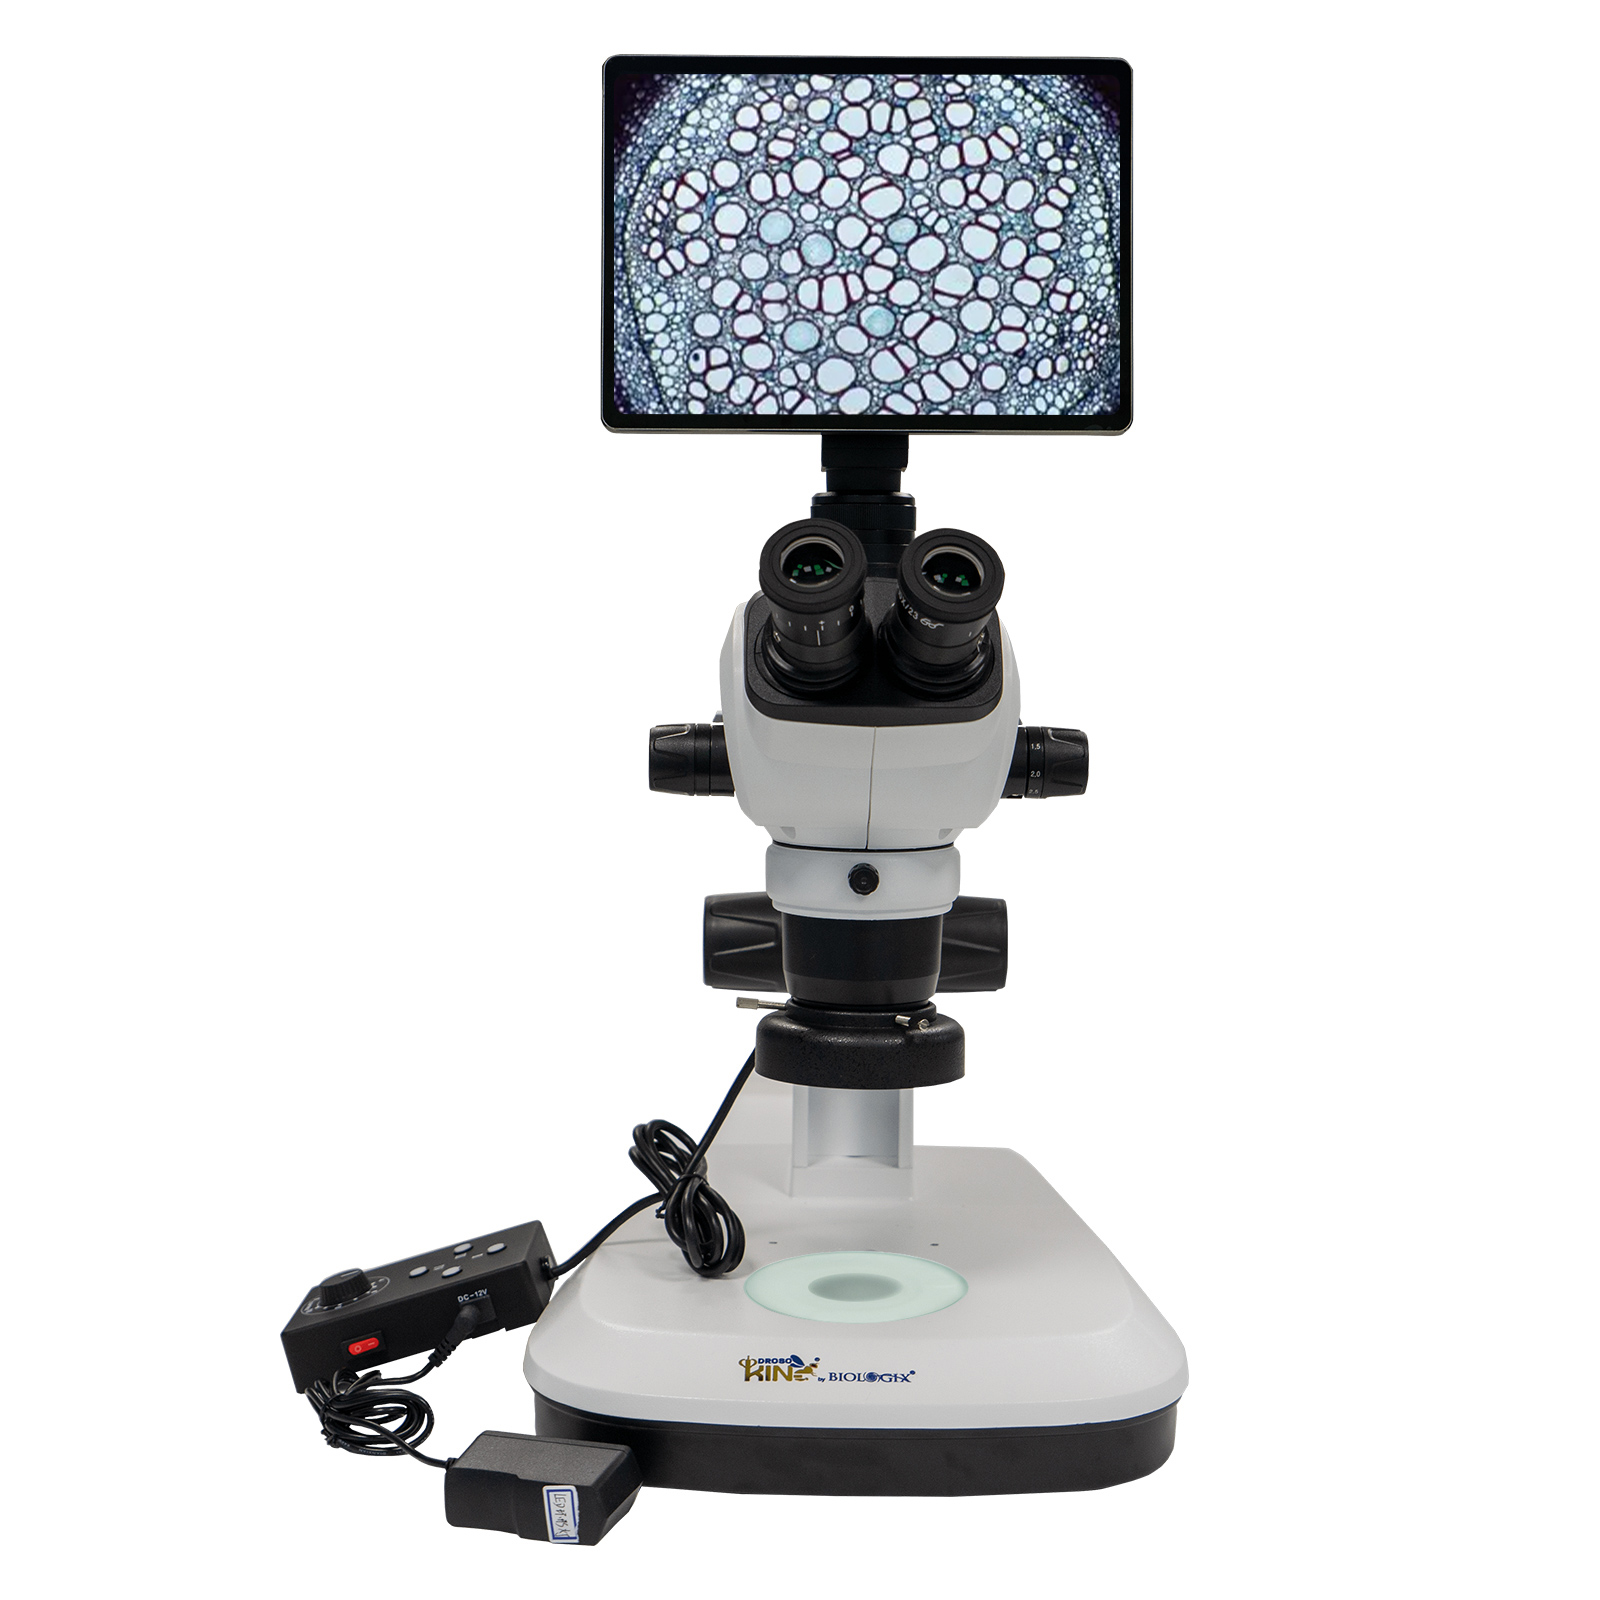 Trinocular Microscope, Eyepiece 10X/23mm, with 10.5 inch Android smart all-in-one